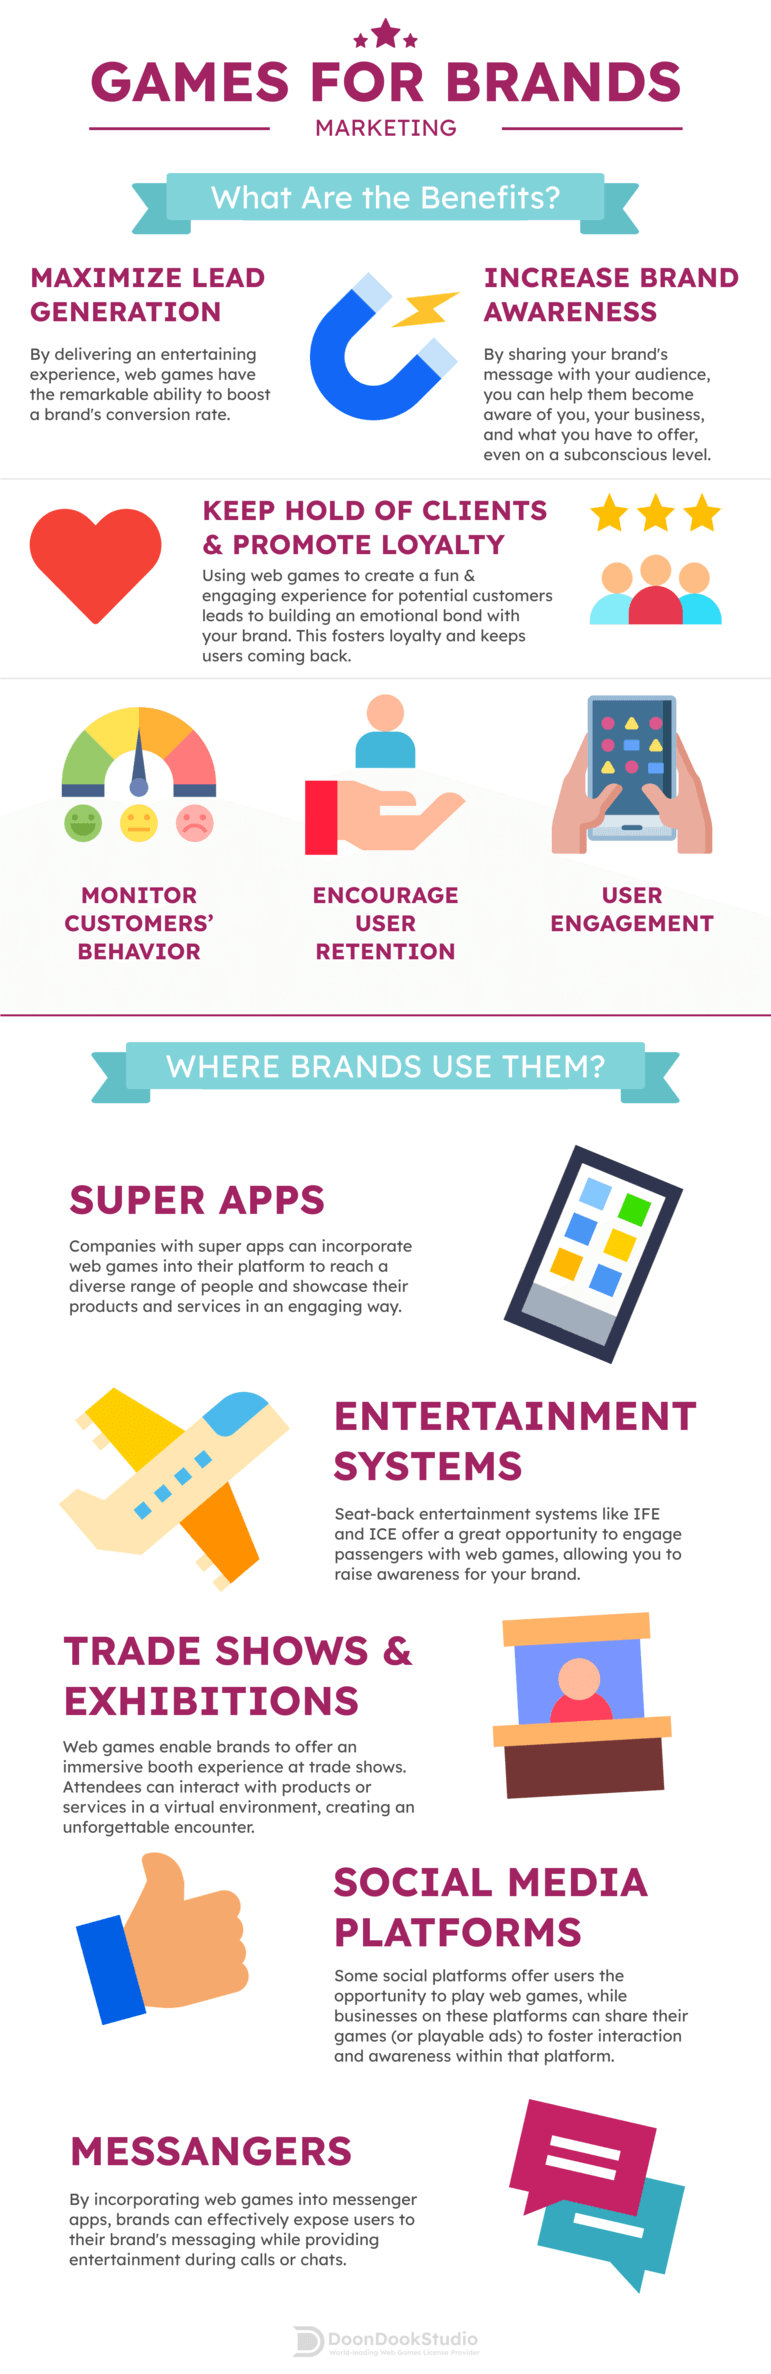 The benefits and applications of web game for brands